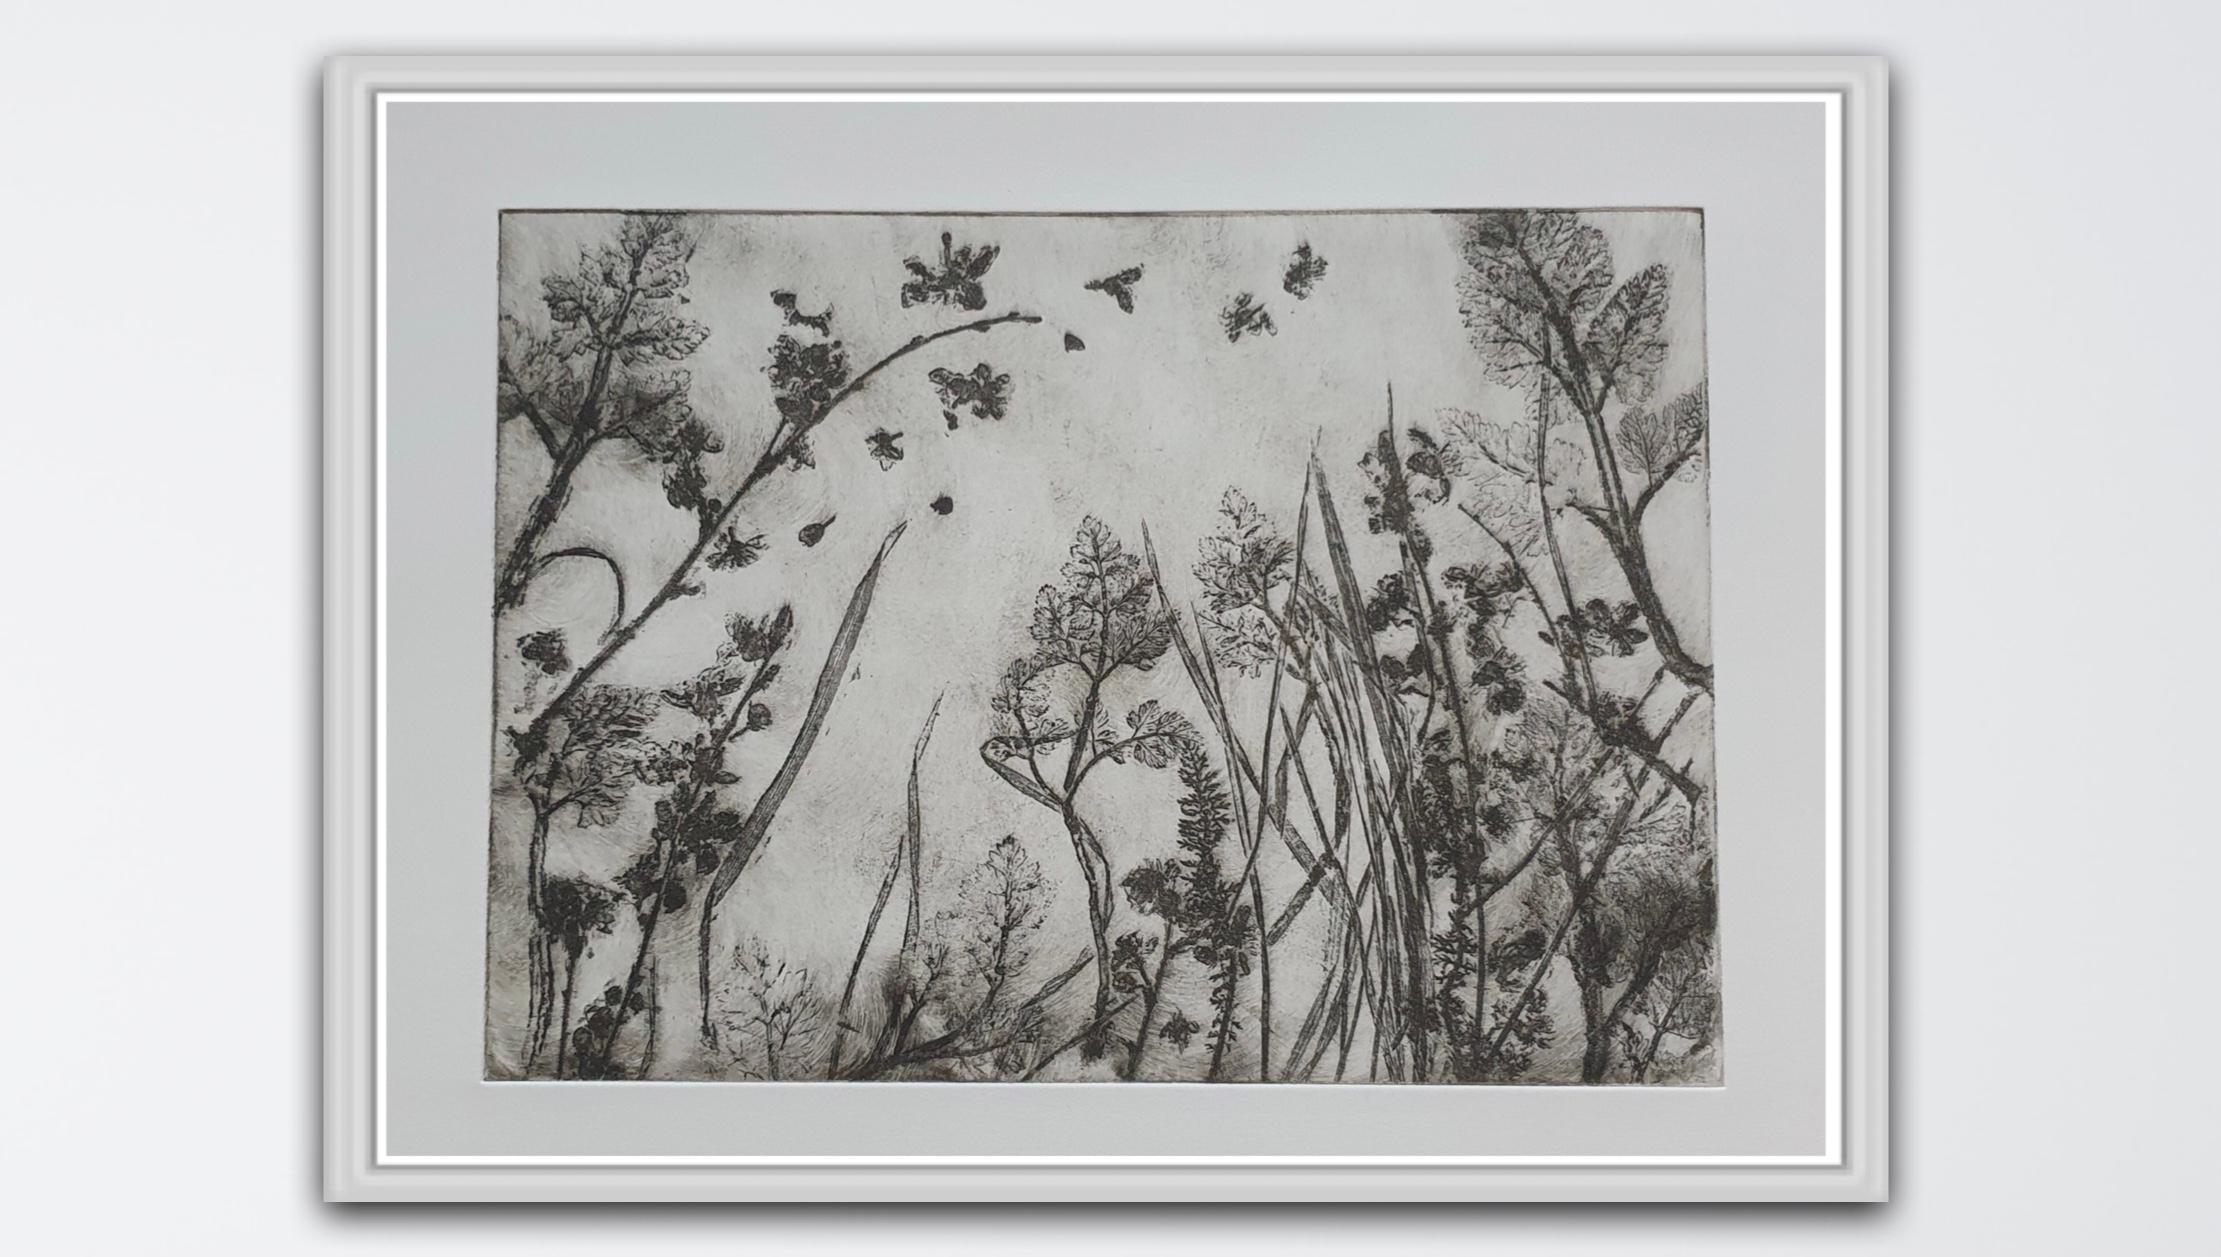 Caught on a Breeze #2 – Sepia by Charlie Davies [2021]

limited_edition
Soft ground etching
Edition number 100
Image size: H:22 cm x W:30 cm
Complete Size of Unframed Work: H:36 cm x W:50 cm x D:0.1cm
Sold Unframed
Please note that insitu images are